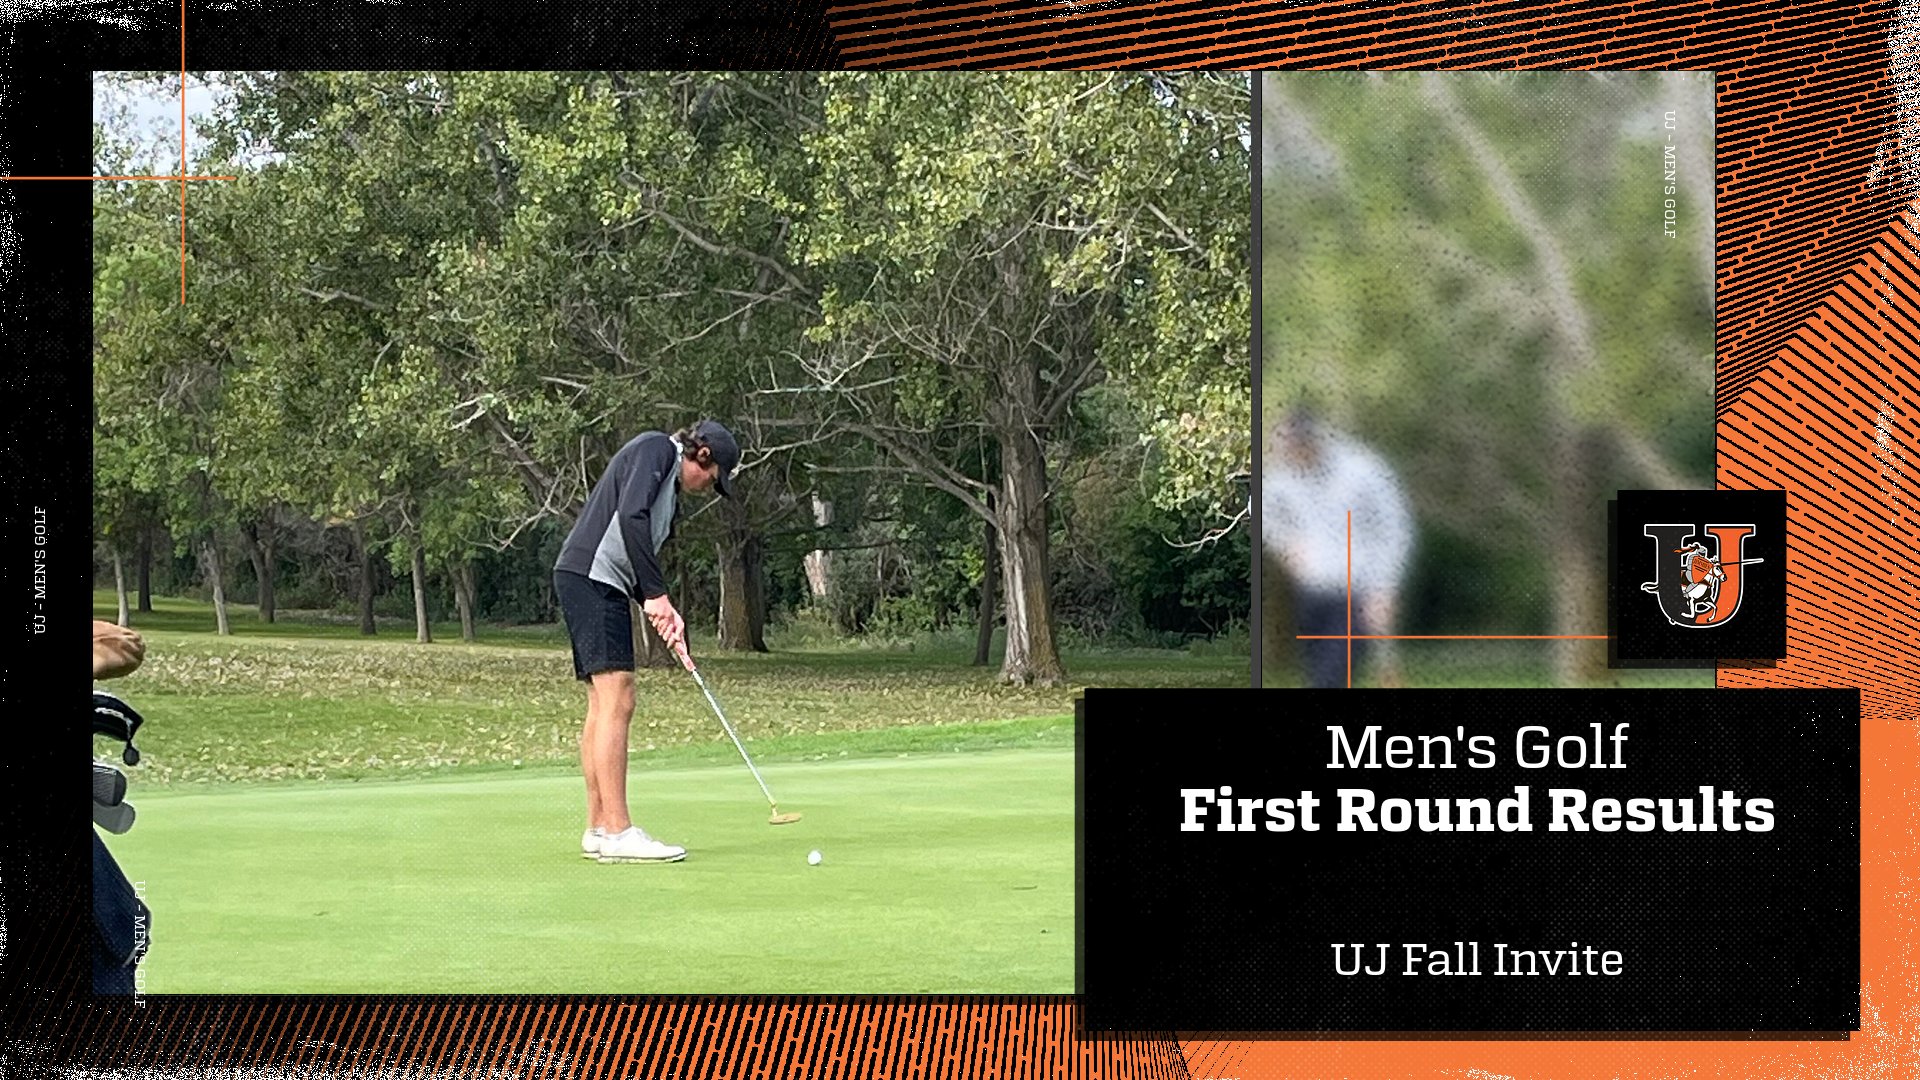 Men's golf in top 5 after first round of UJ Fall Invite